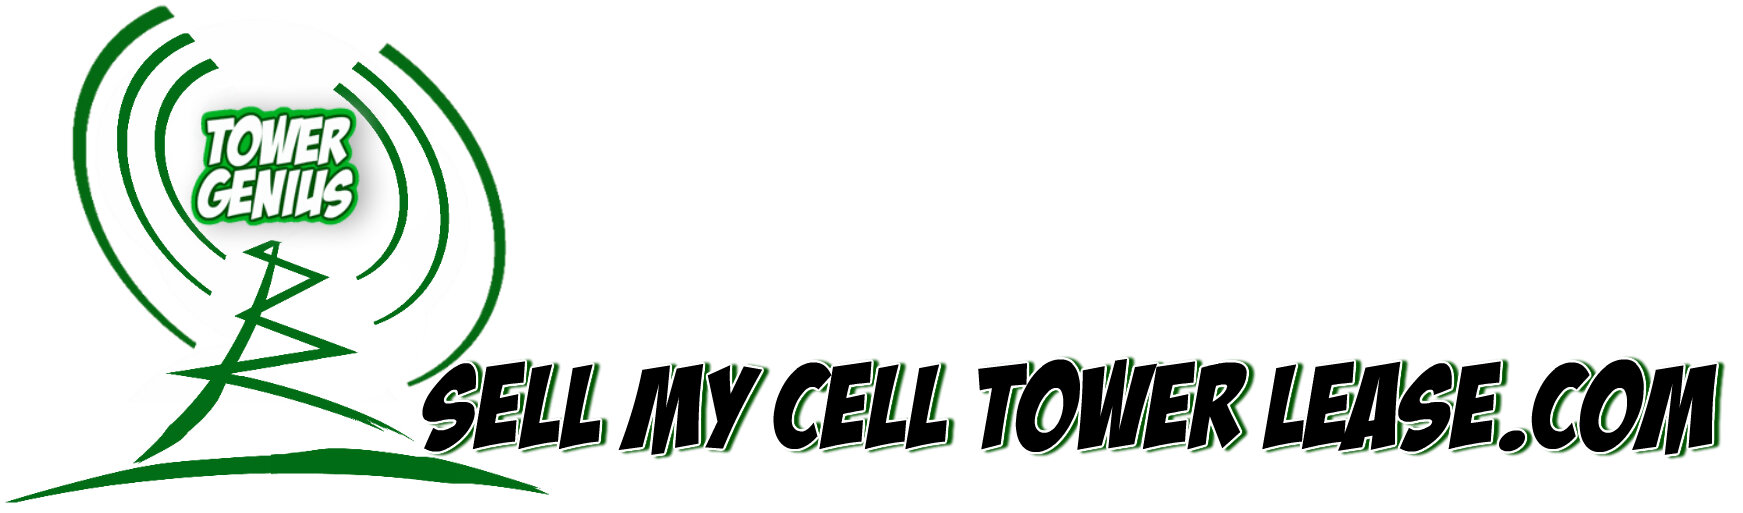 SELL MY CELL TOWER LEASE logo